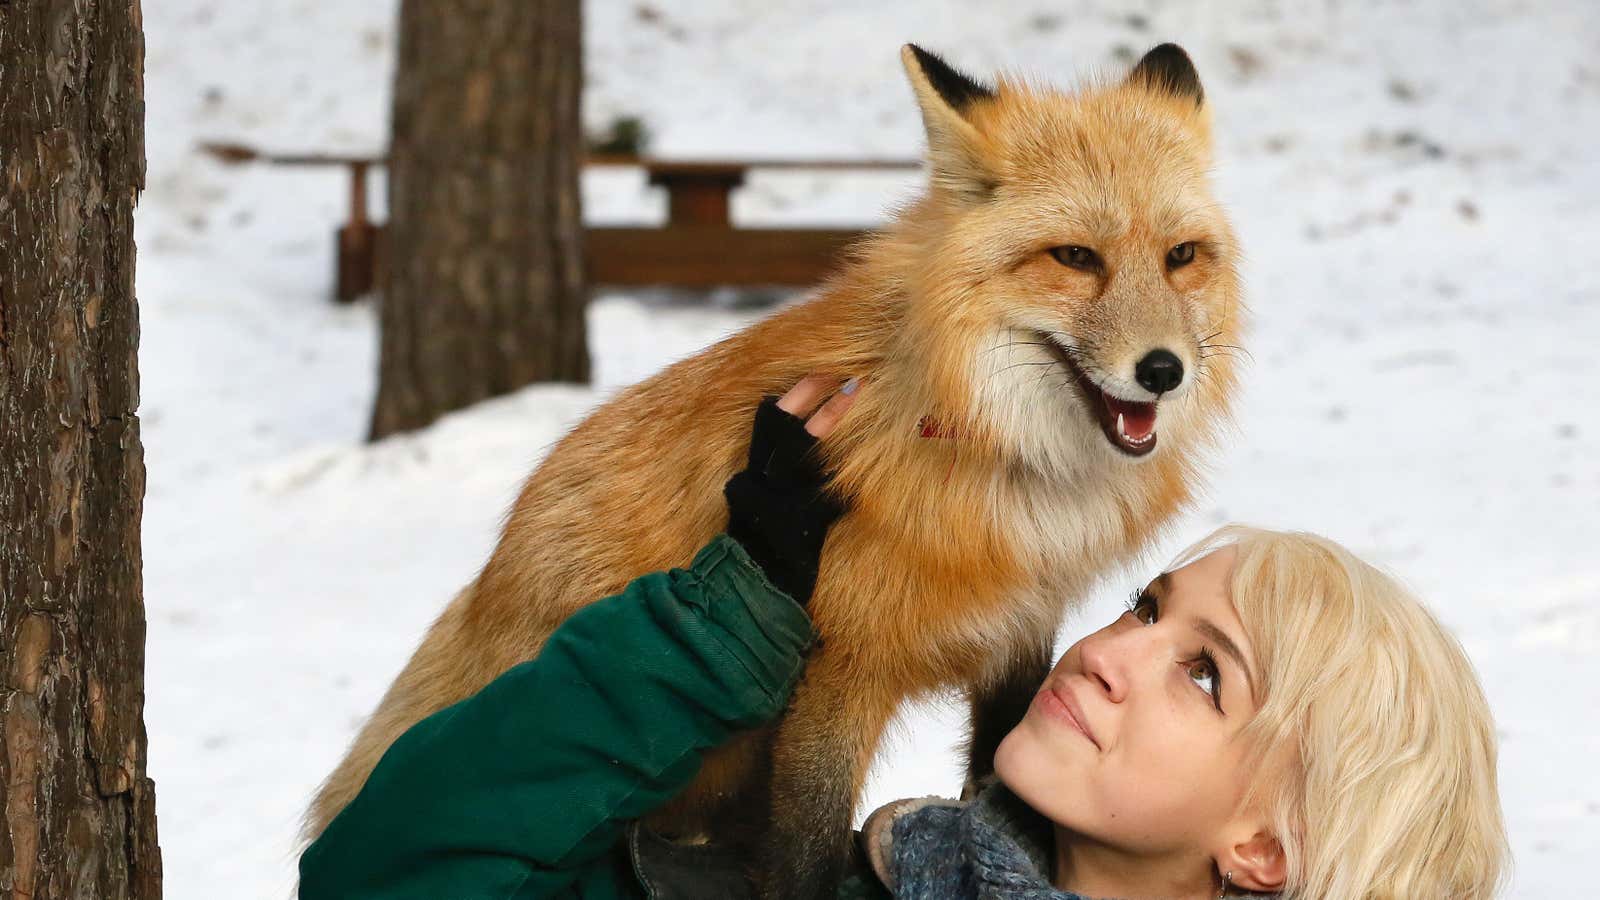 The genes of friendly red foxes can teach us about human aggression.